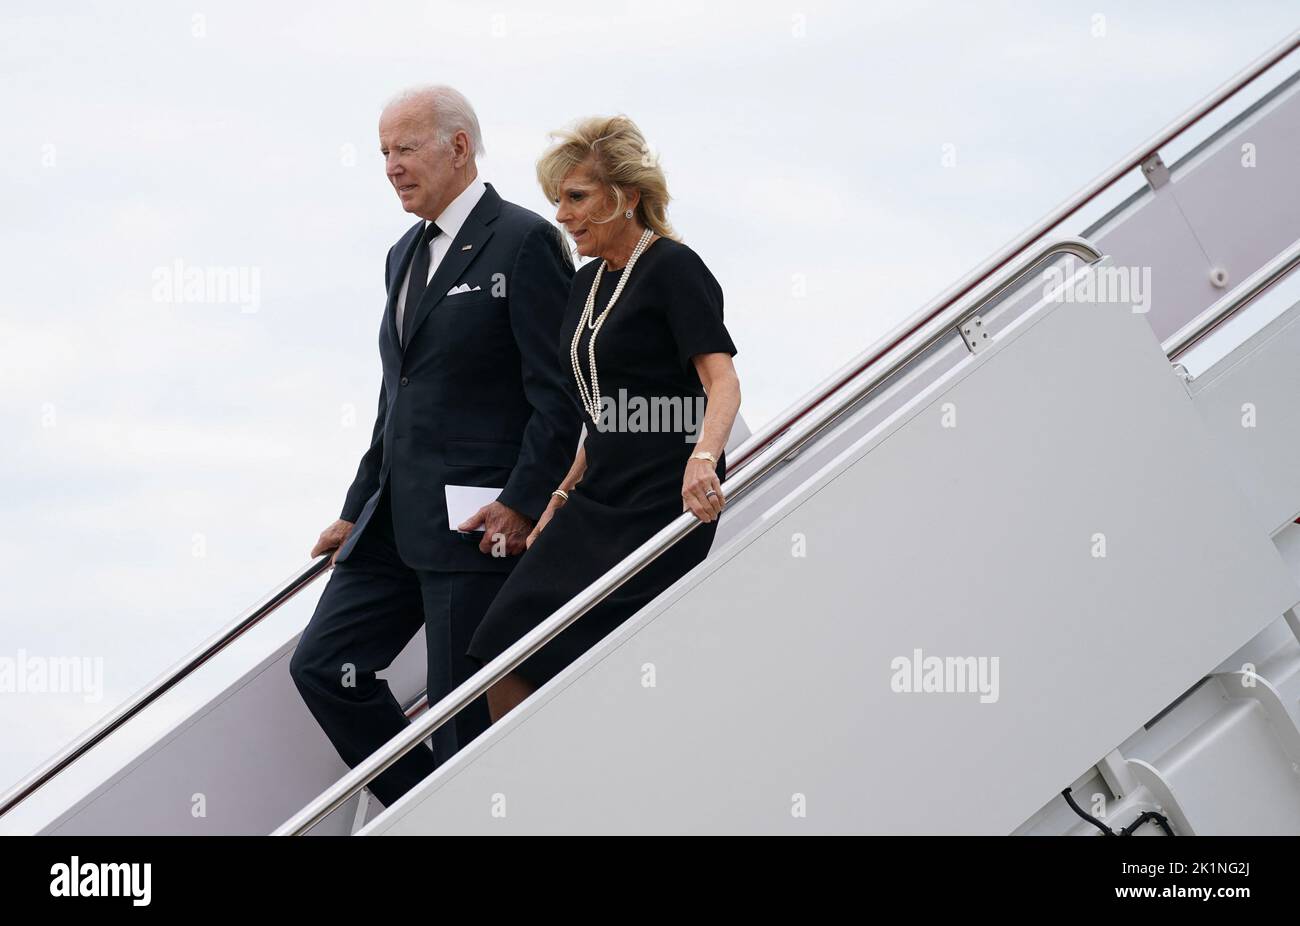 U.S. President Joe Biden and first lady Jill Biden step from Air Force One upon their return from London, at Joint Base Andrews in Maryland, U.S., September 19, 2022. REUTERS/Kevin Lamarque Stock Photo